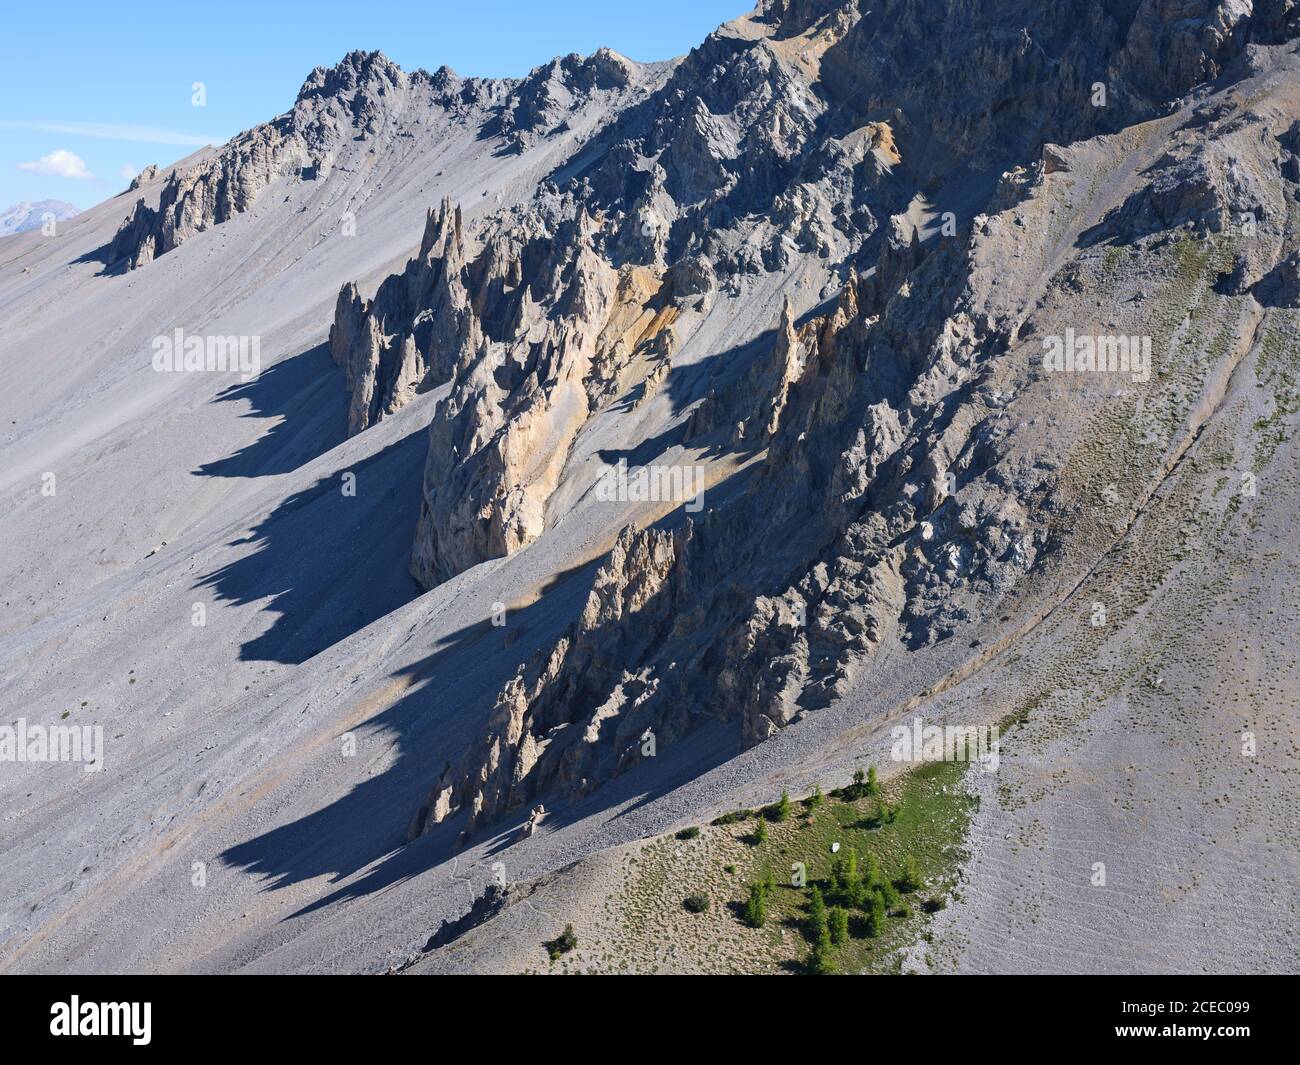 AERIAL VIEW. Barren landscape of eroded pinnacles and a large slope of scree. La Casse Déserte, Col Izoard, Arvieux, Hautes-Alpes, France. Stock Photo